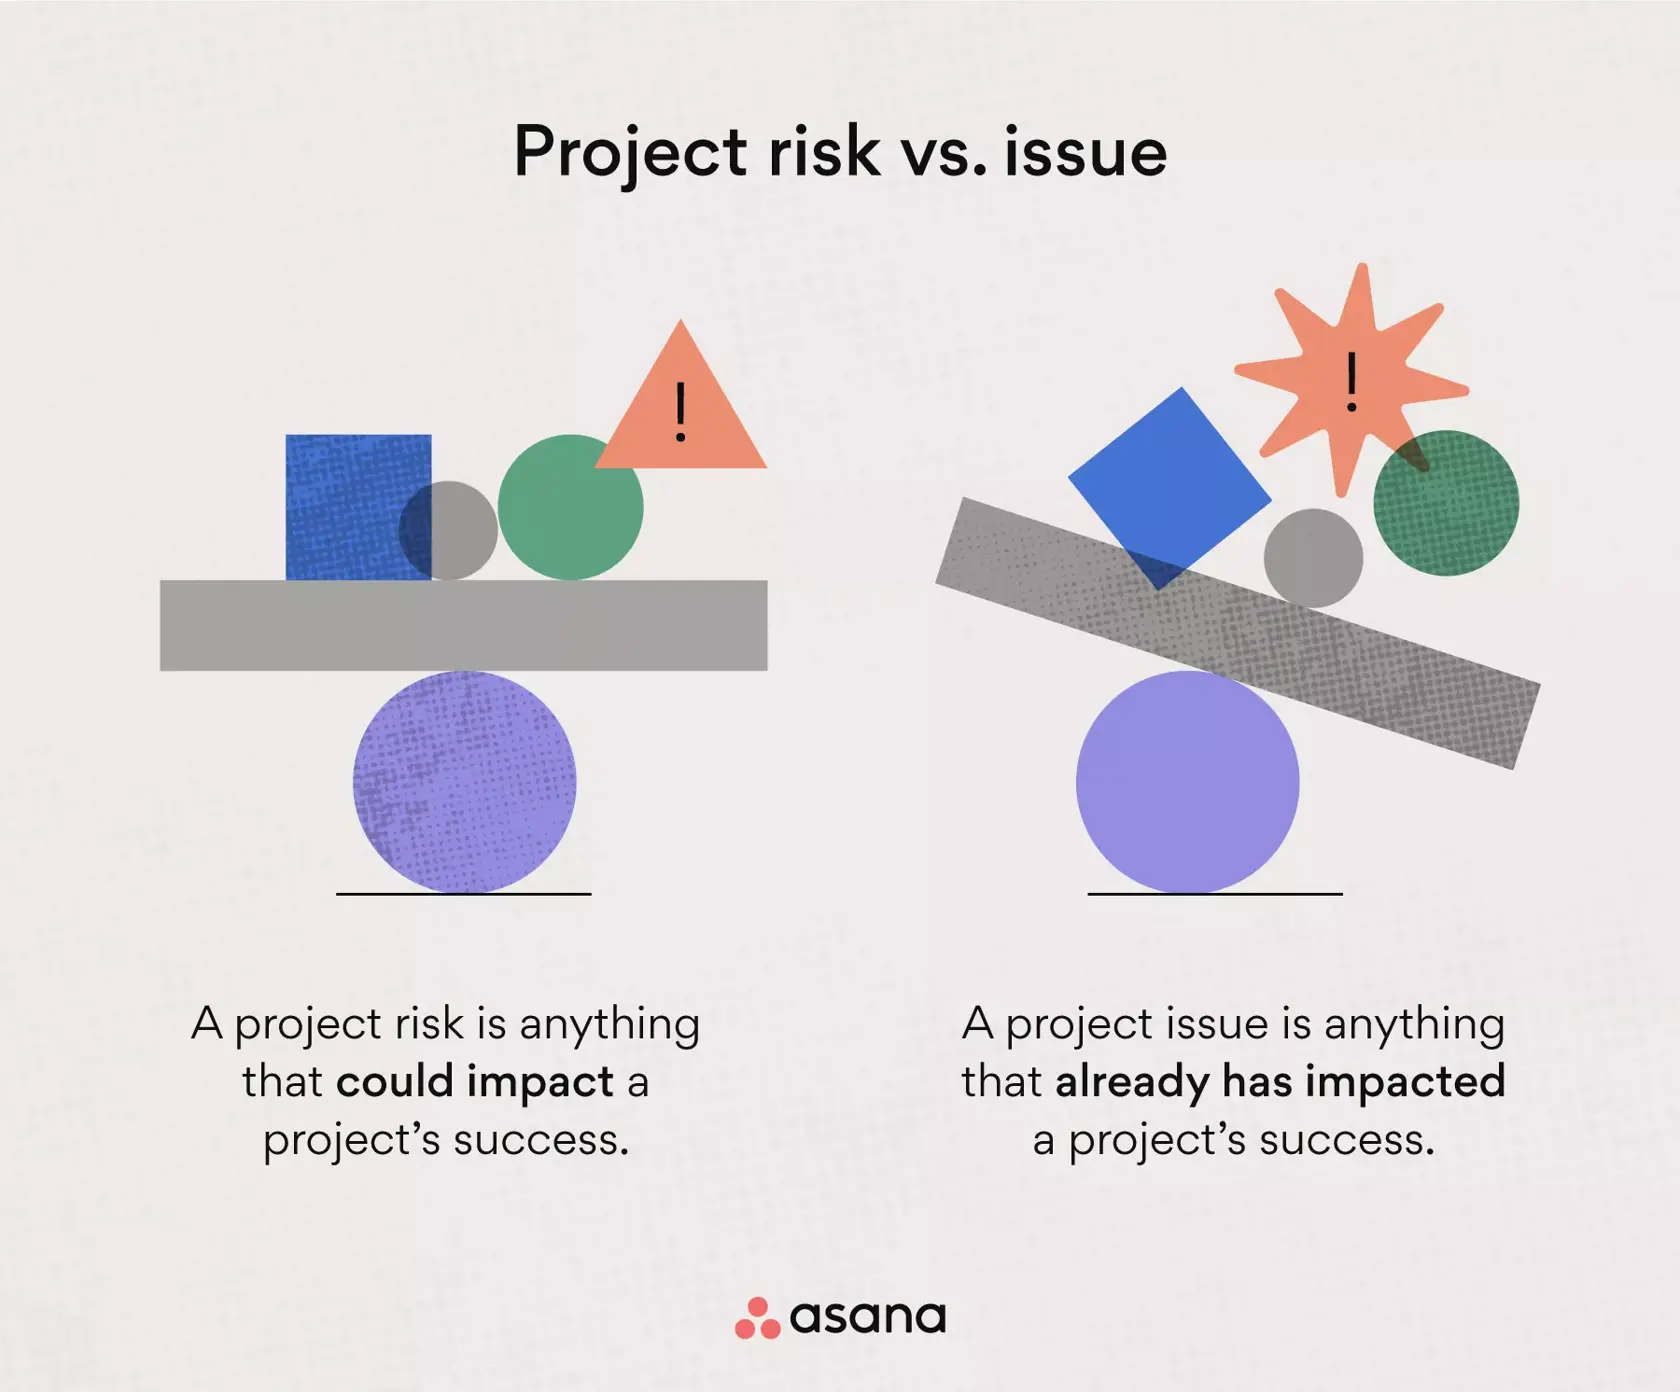 Project risk vs. issue in project management